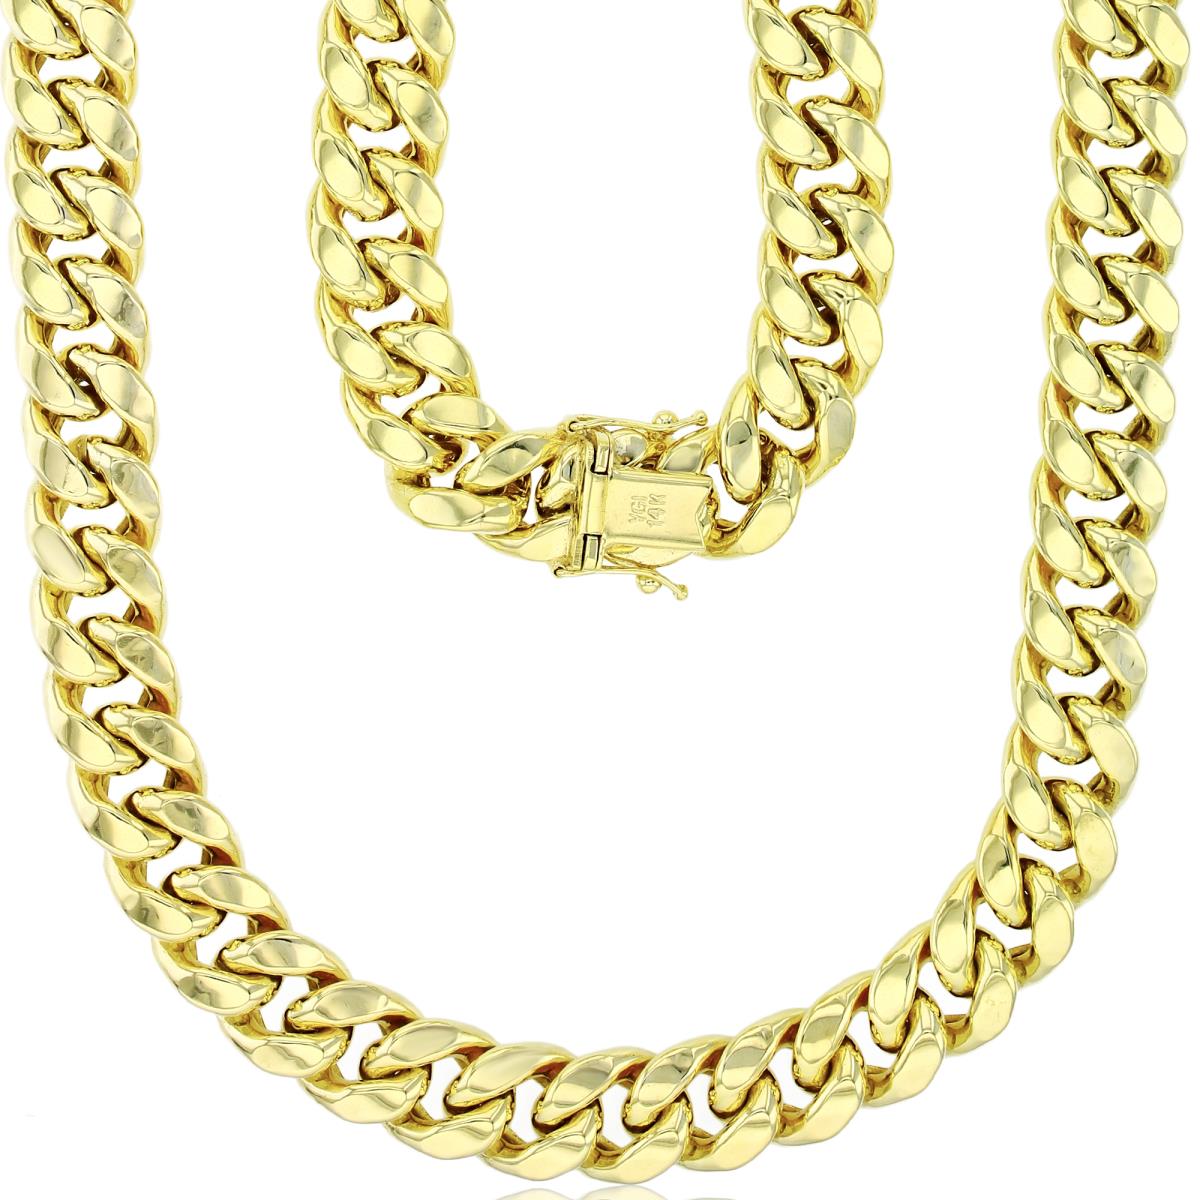 10K Yellow Gold 12mm 28" 300 Hollow Miami Cuban Chain with Box Lock